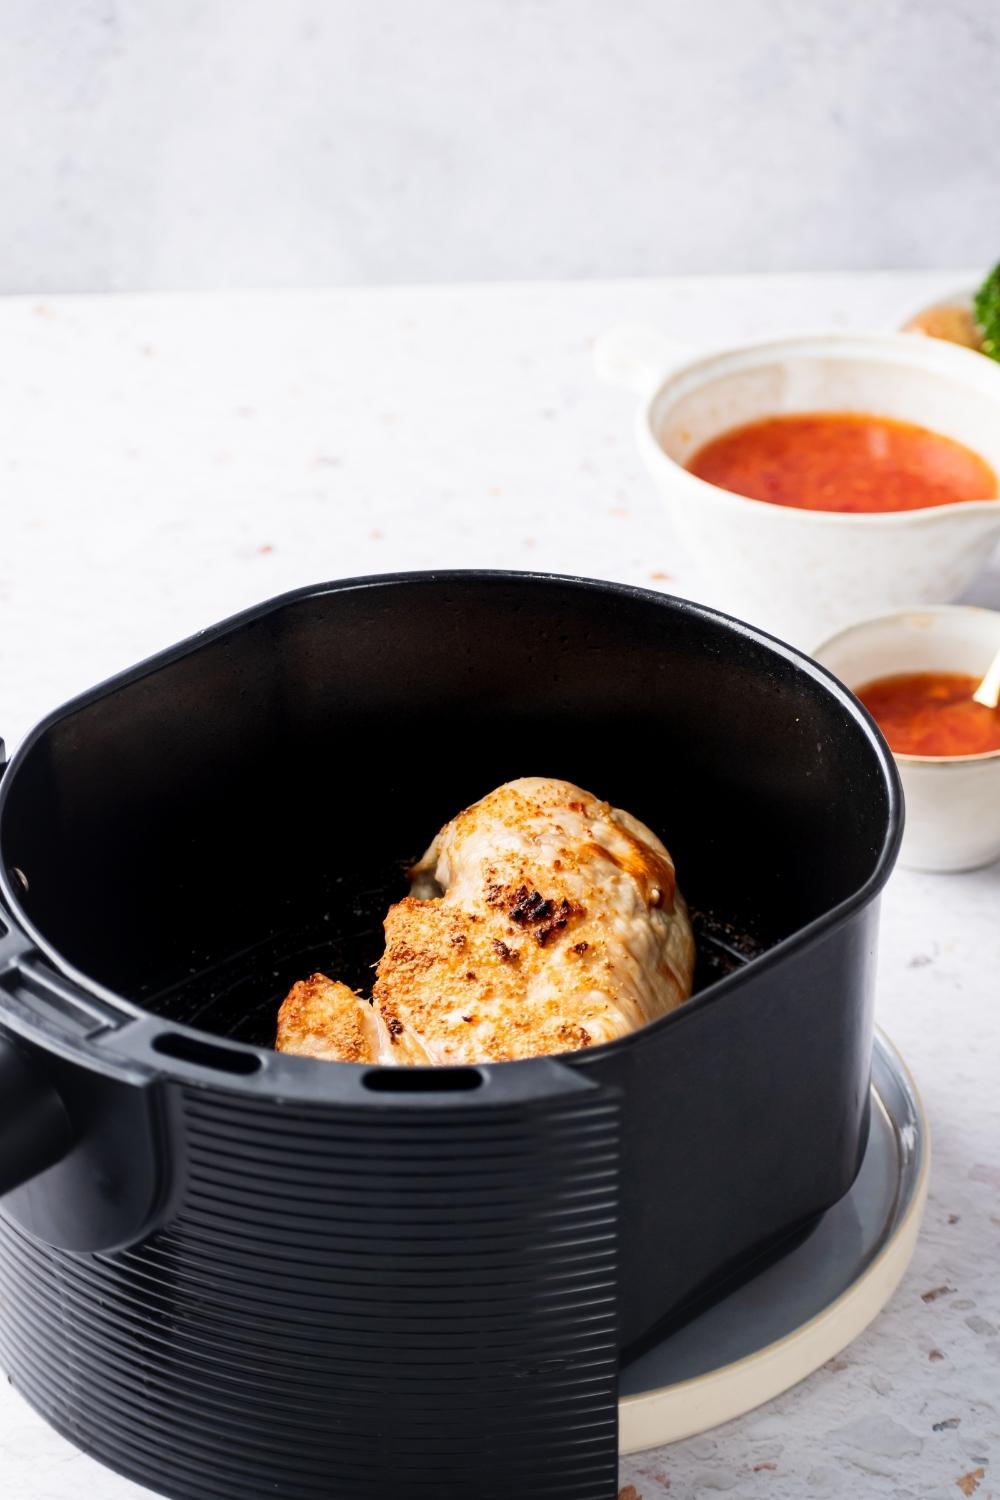 A cooked chicken breast in an air fryer. Behind it is a small white bowl of sweet chili sauce and a larger white bowl of sweet chili.